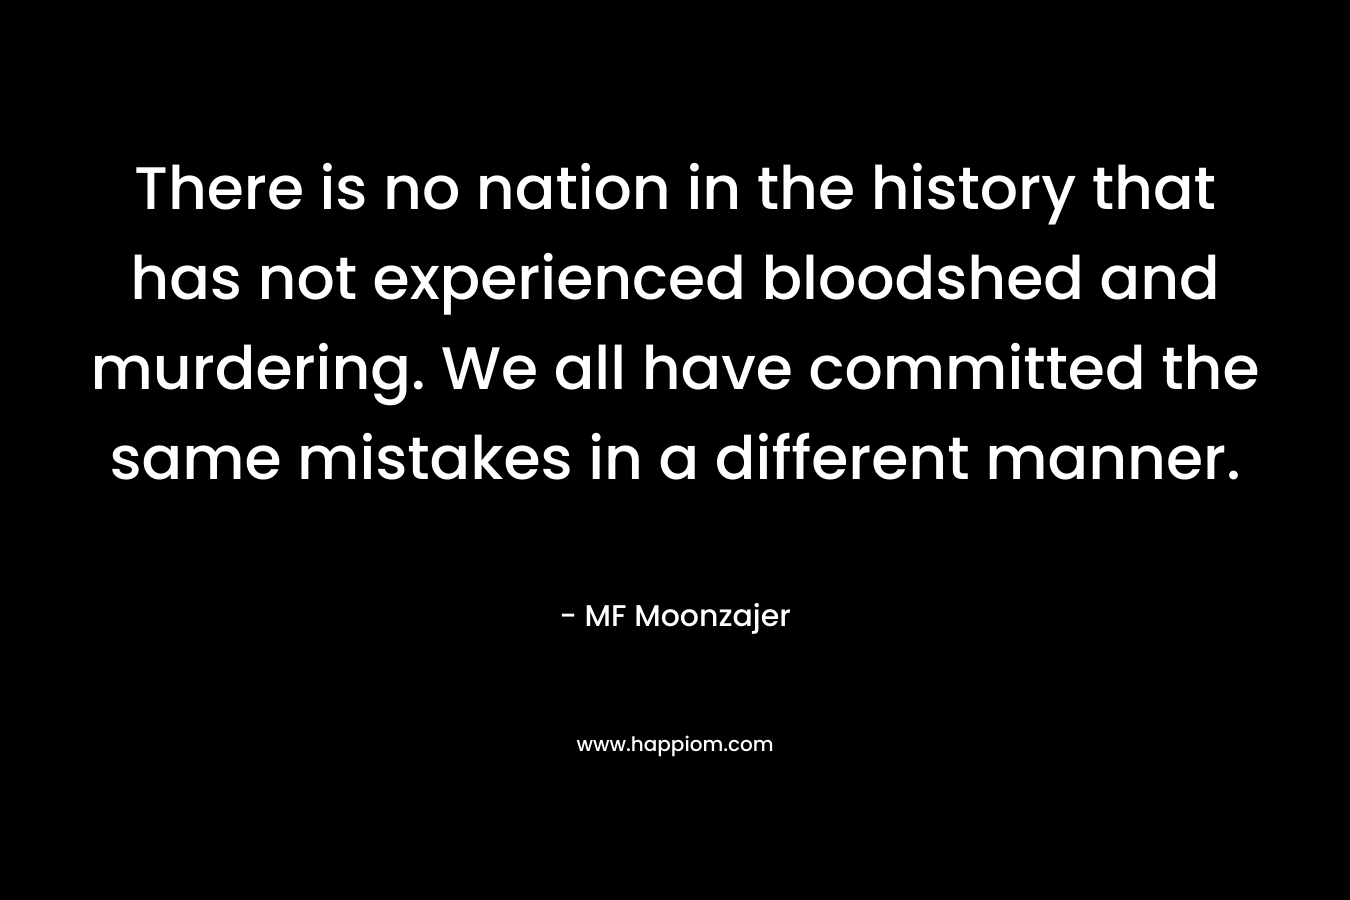 There is no nation in the history that has not experienced bloodshed and murdering. We all have committed the same mistakes in a different manner. – MF Moonzajer